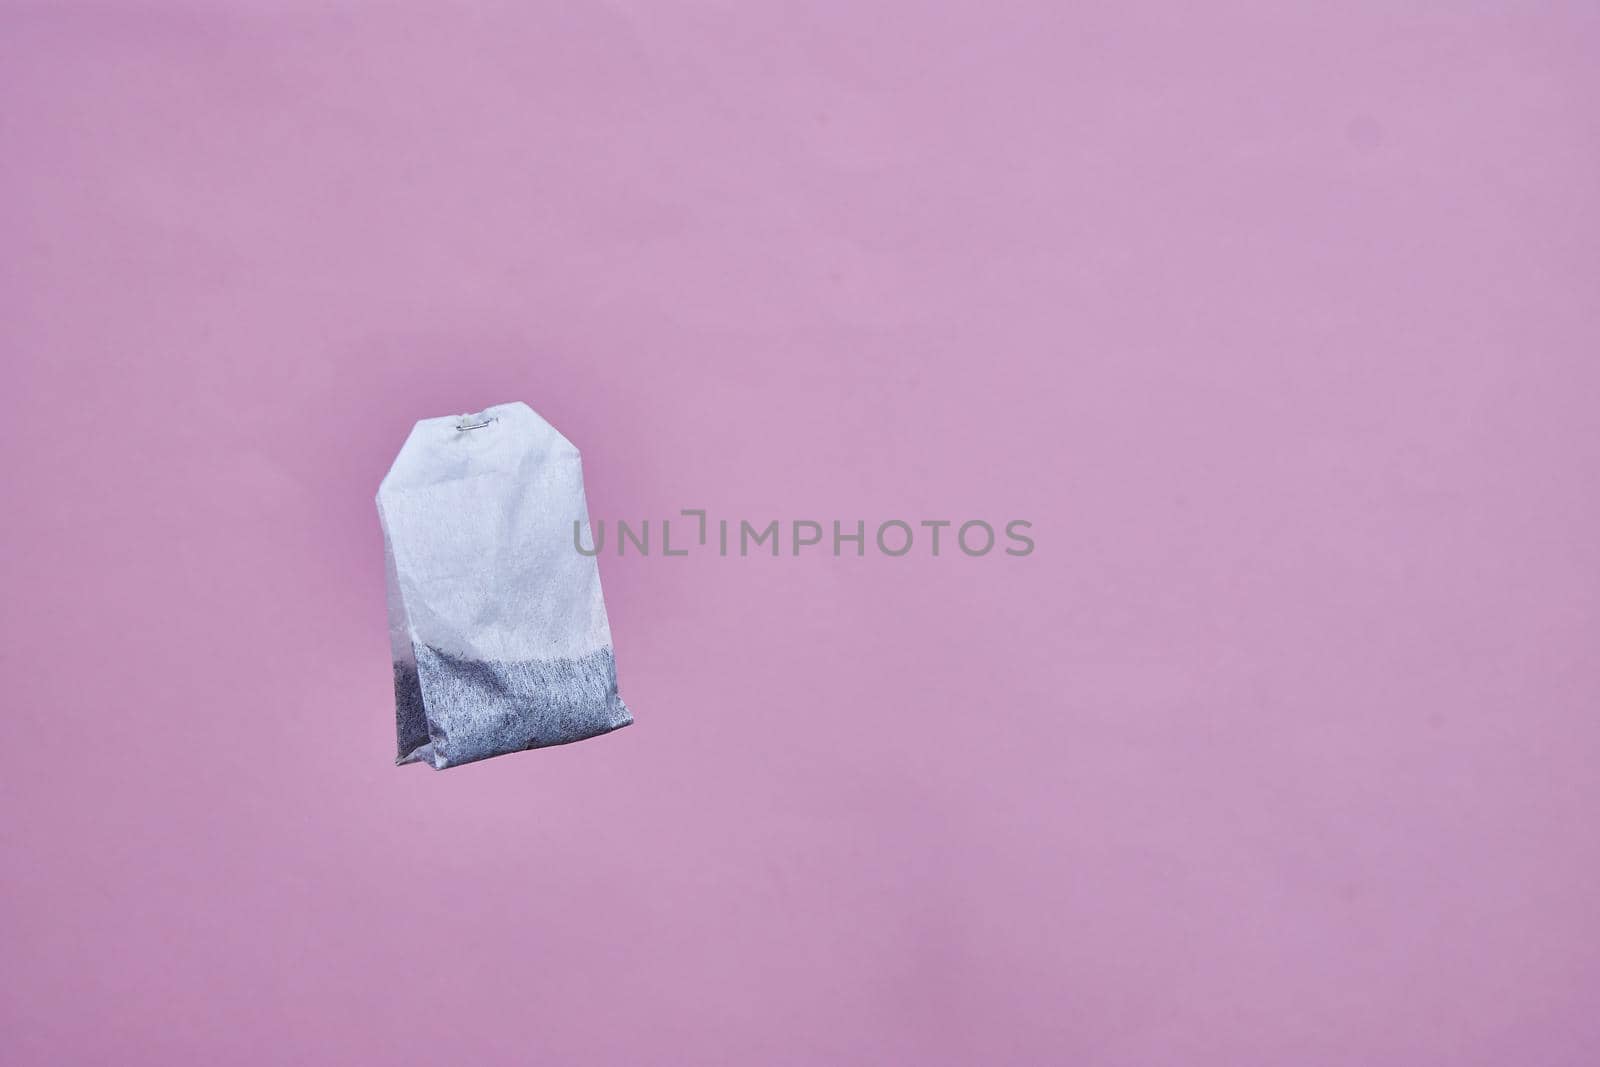 a tea bag spinning on a pink background by vadiar